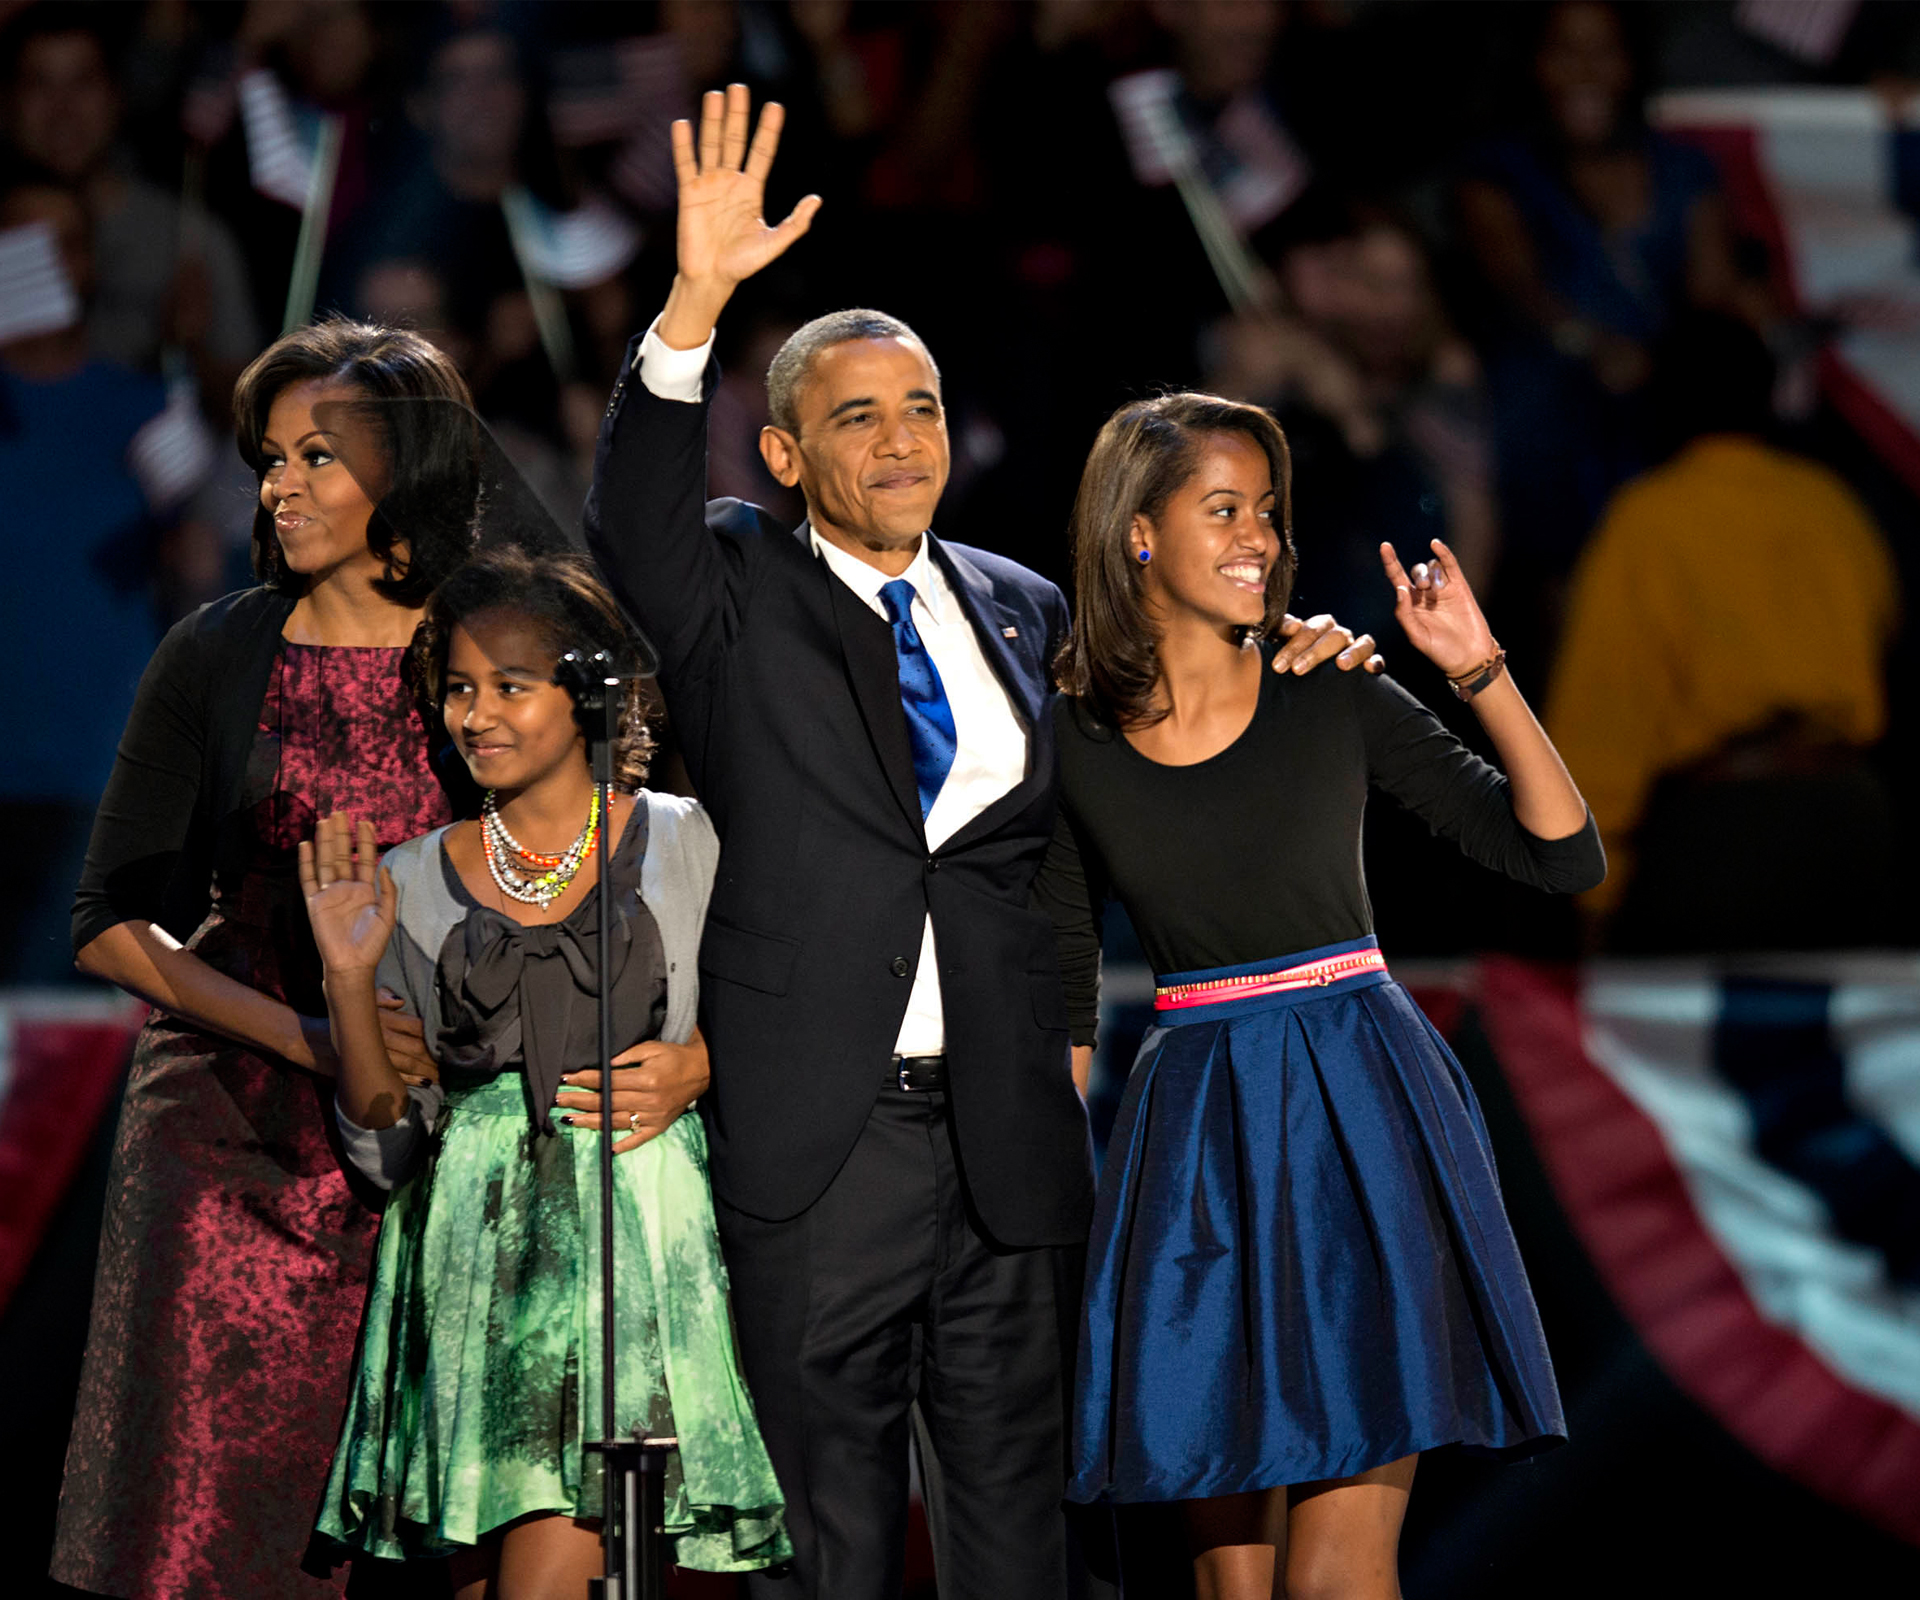 Obama: I never miss dinner with my daughters